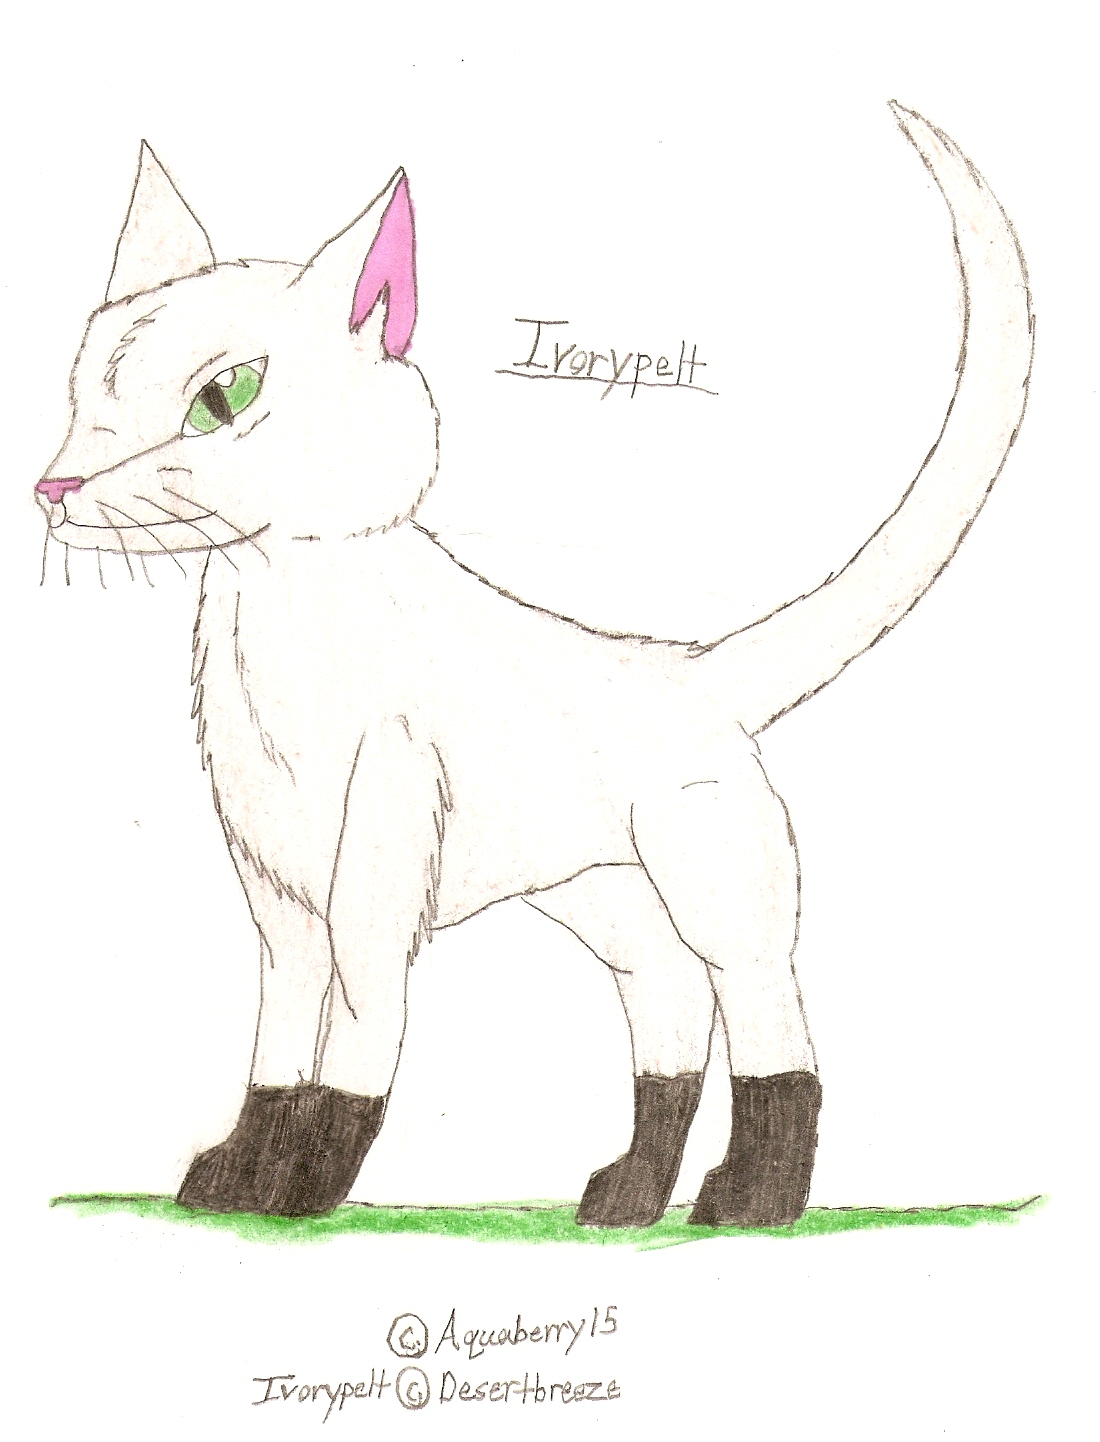 Ivorypelt by Aquaberry15